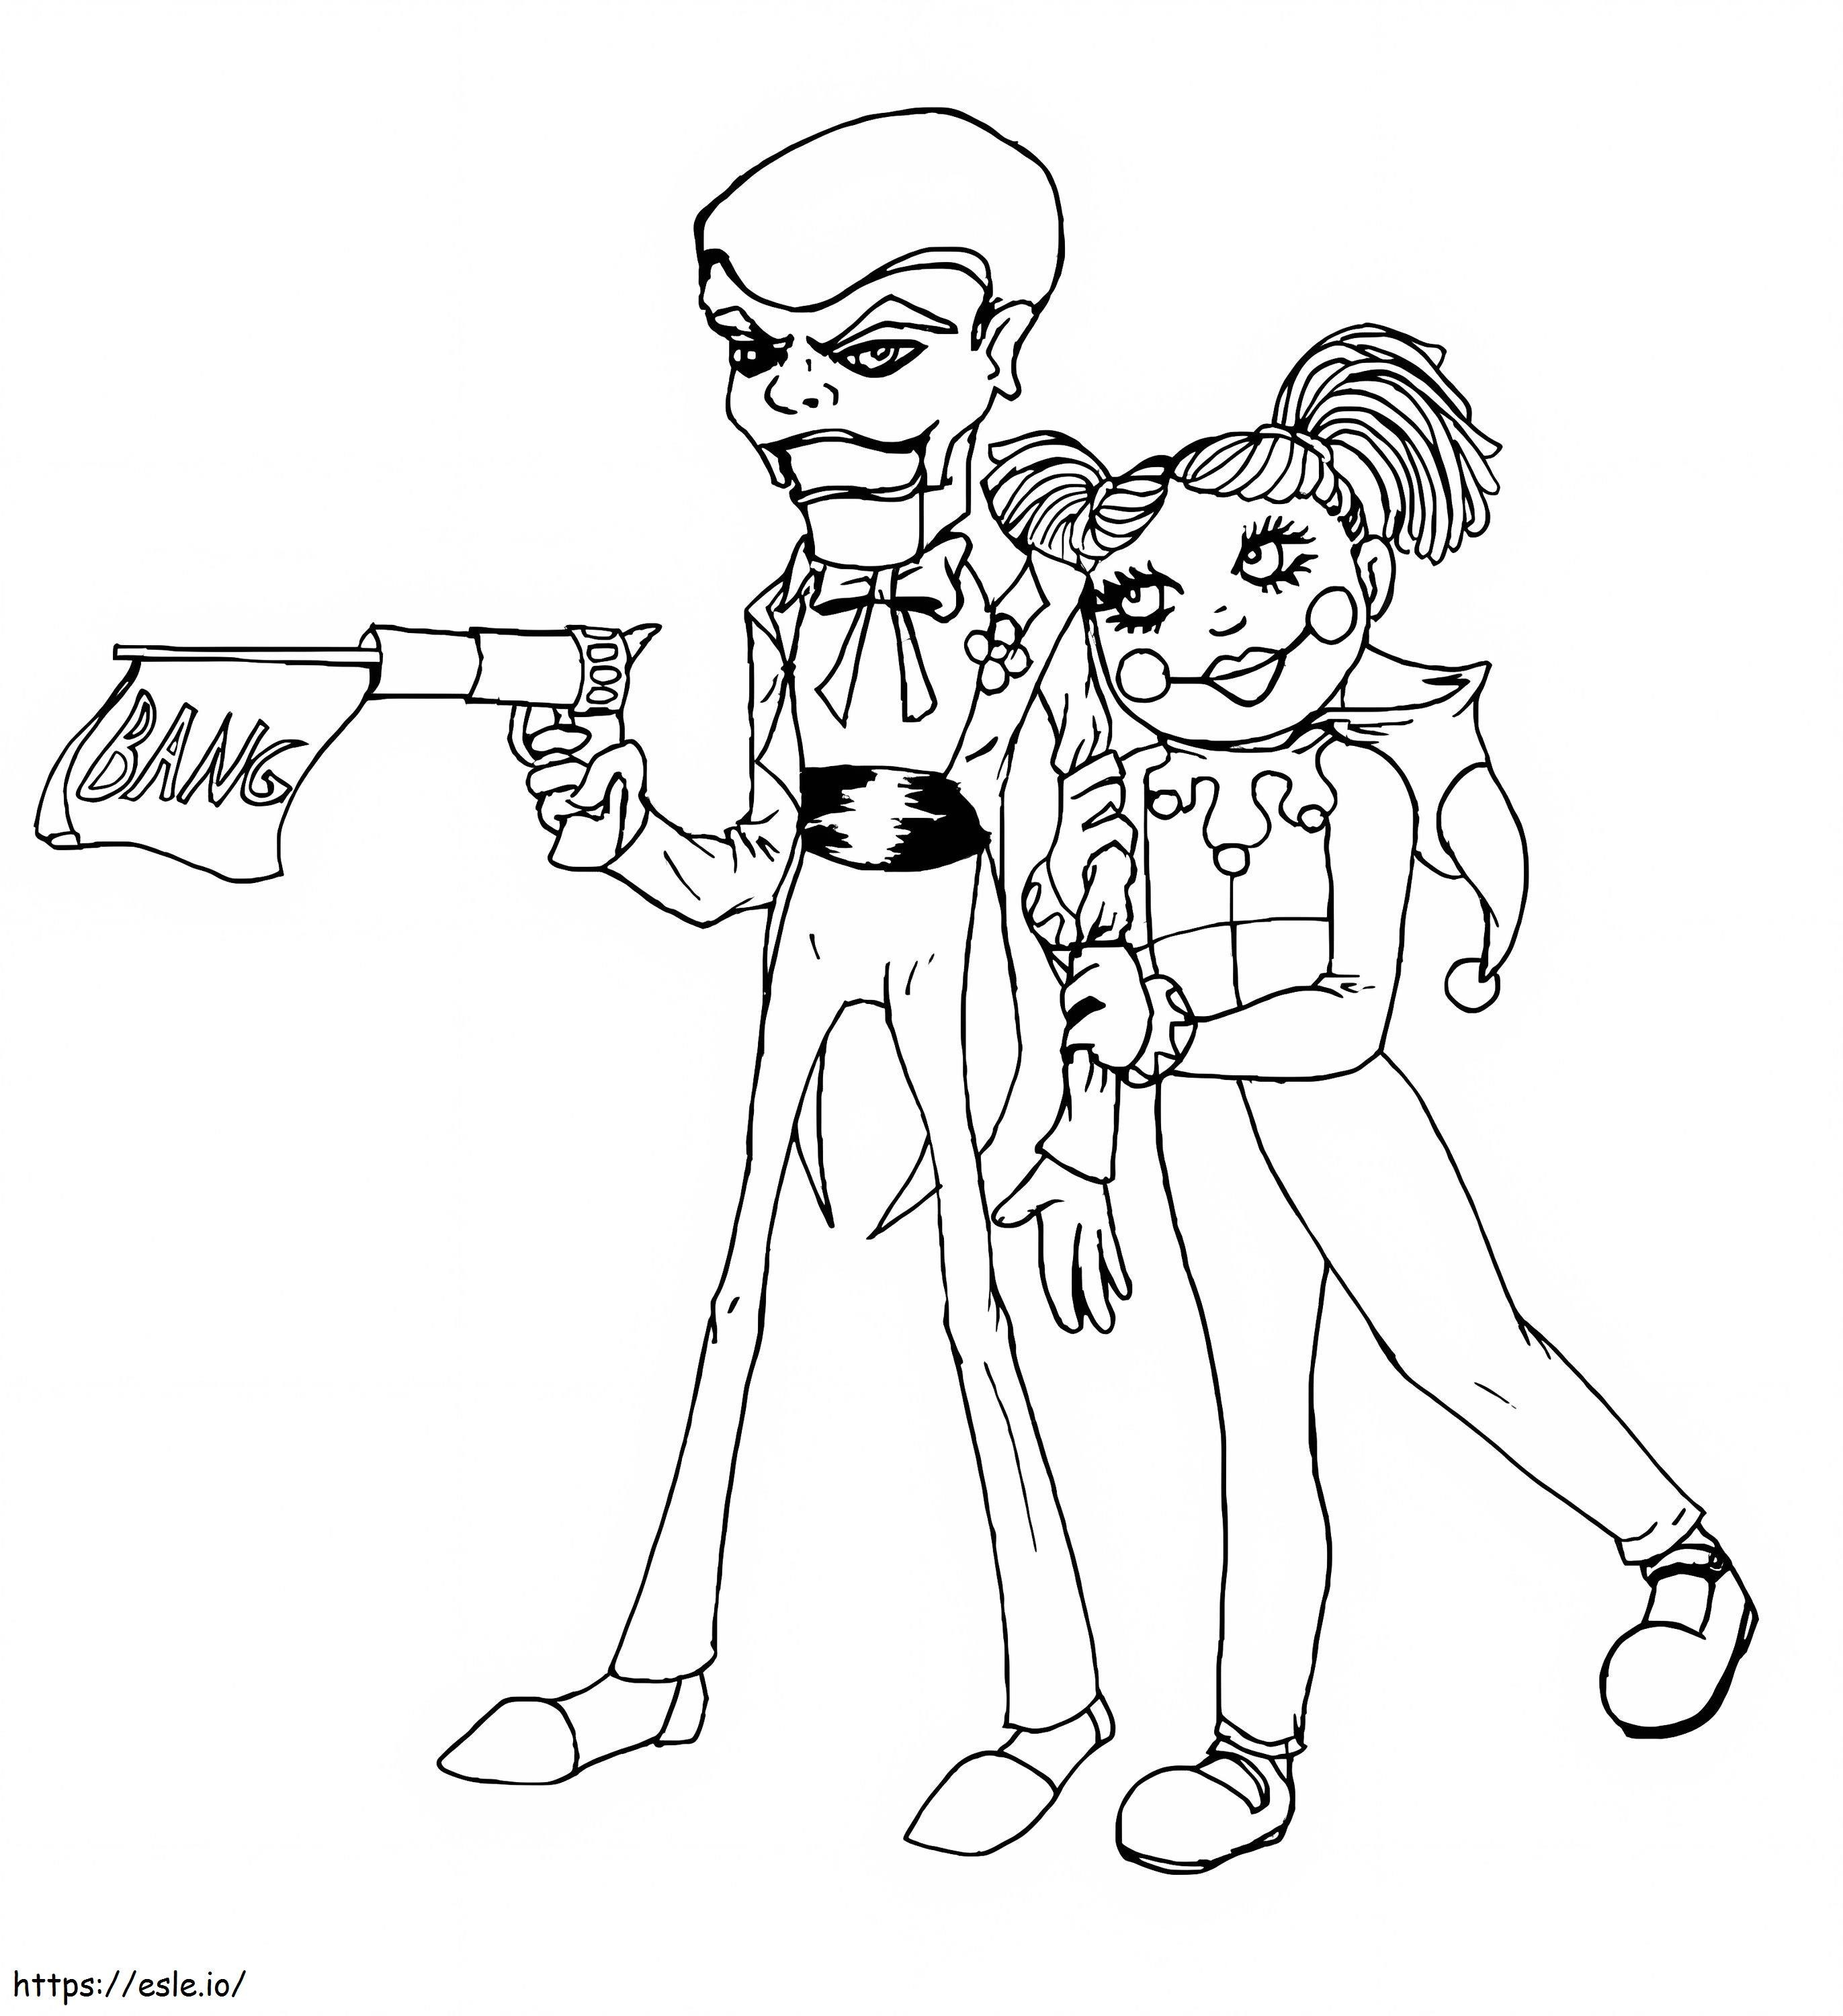 Slappy And Friend coloring page